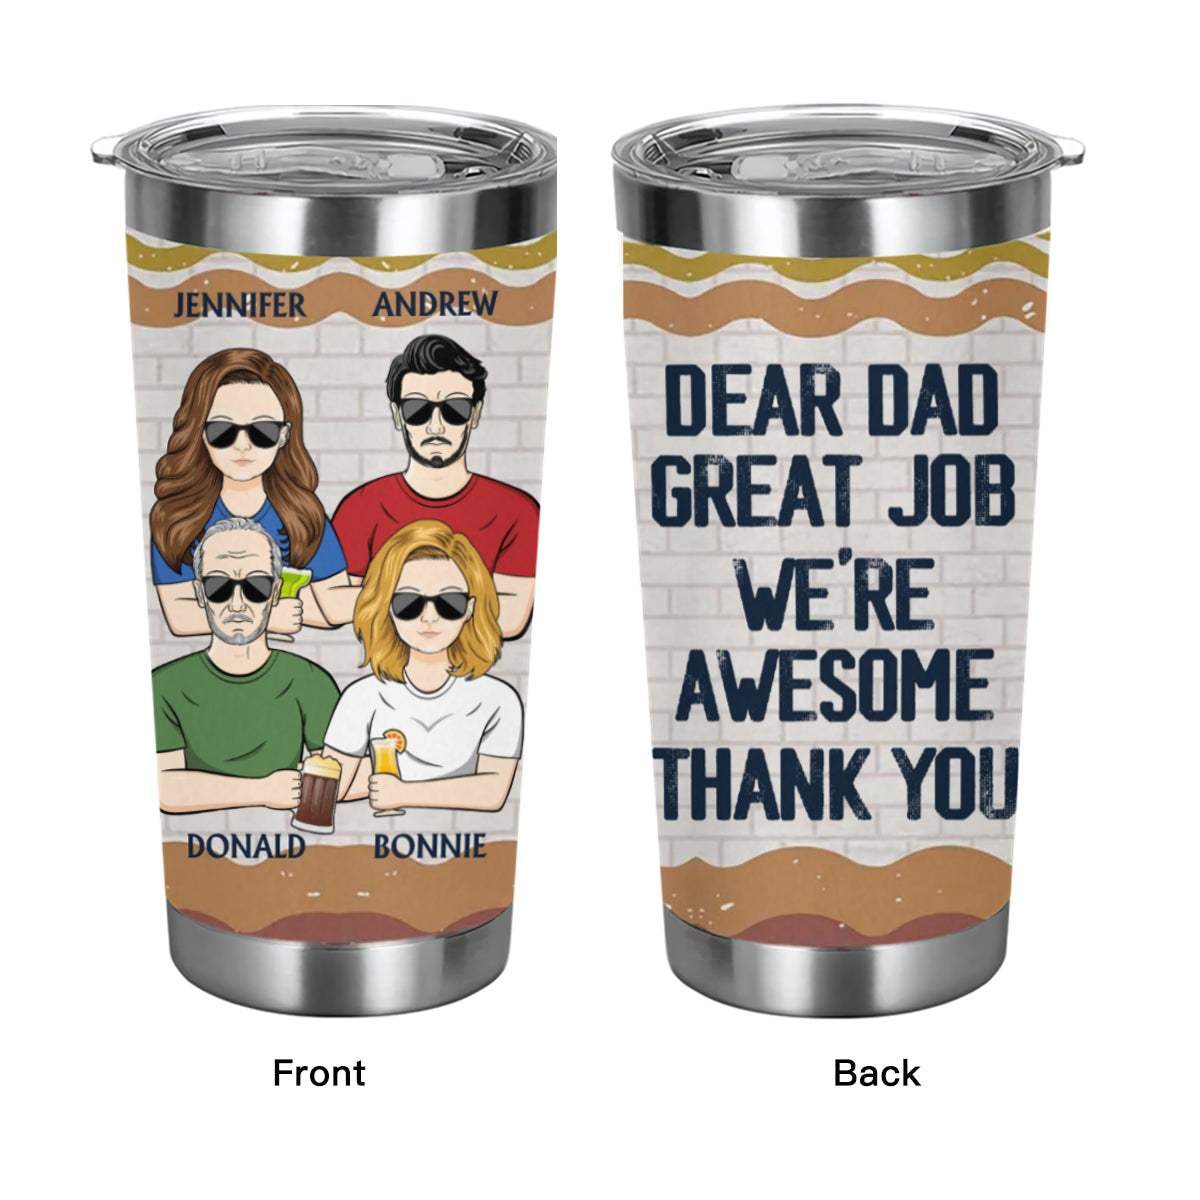 Dear Dad Great Job I'm Awesome Thank You - Father Gift - Personalized Custom Tumbler